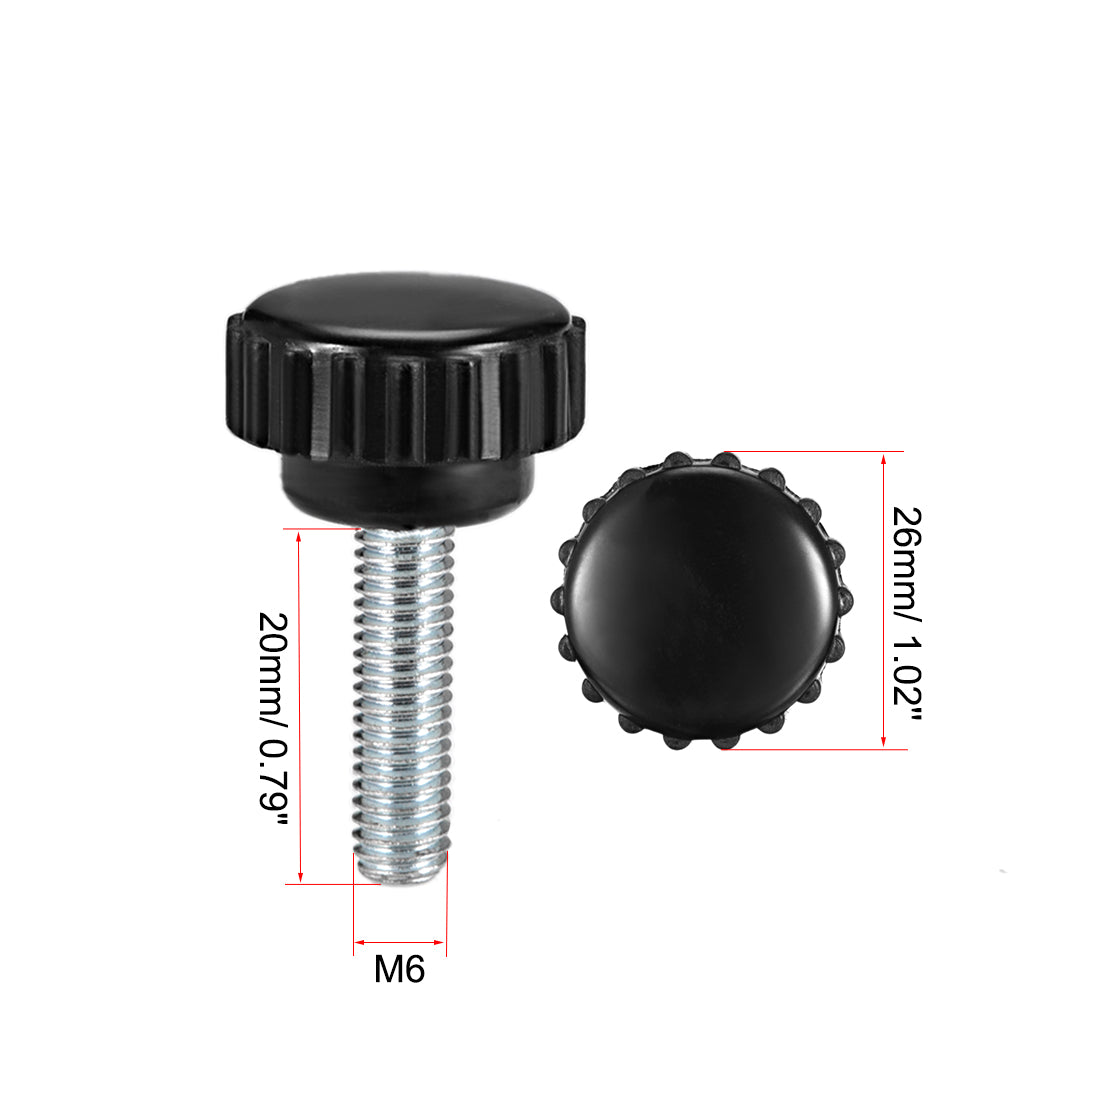 uxcell Uxcell Male Thread Knurled Clamping Knobs Grip Thumb Screw on Type 12 Pcs